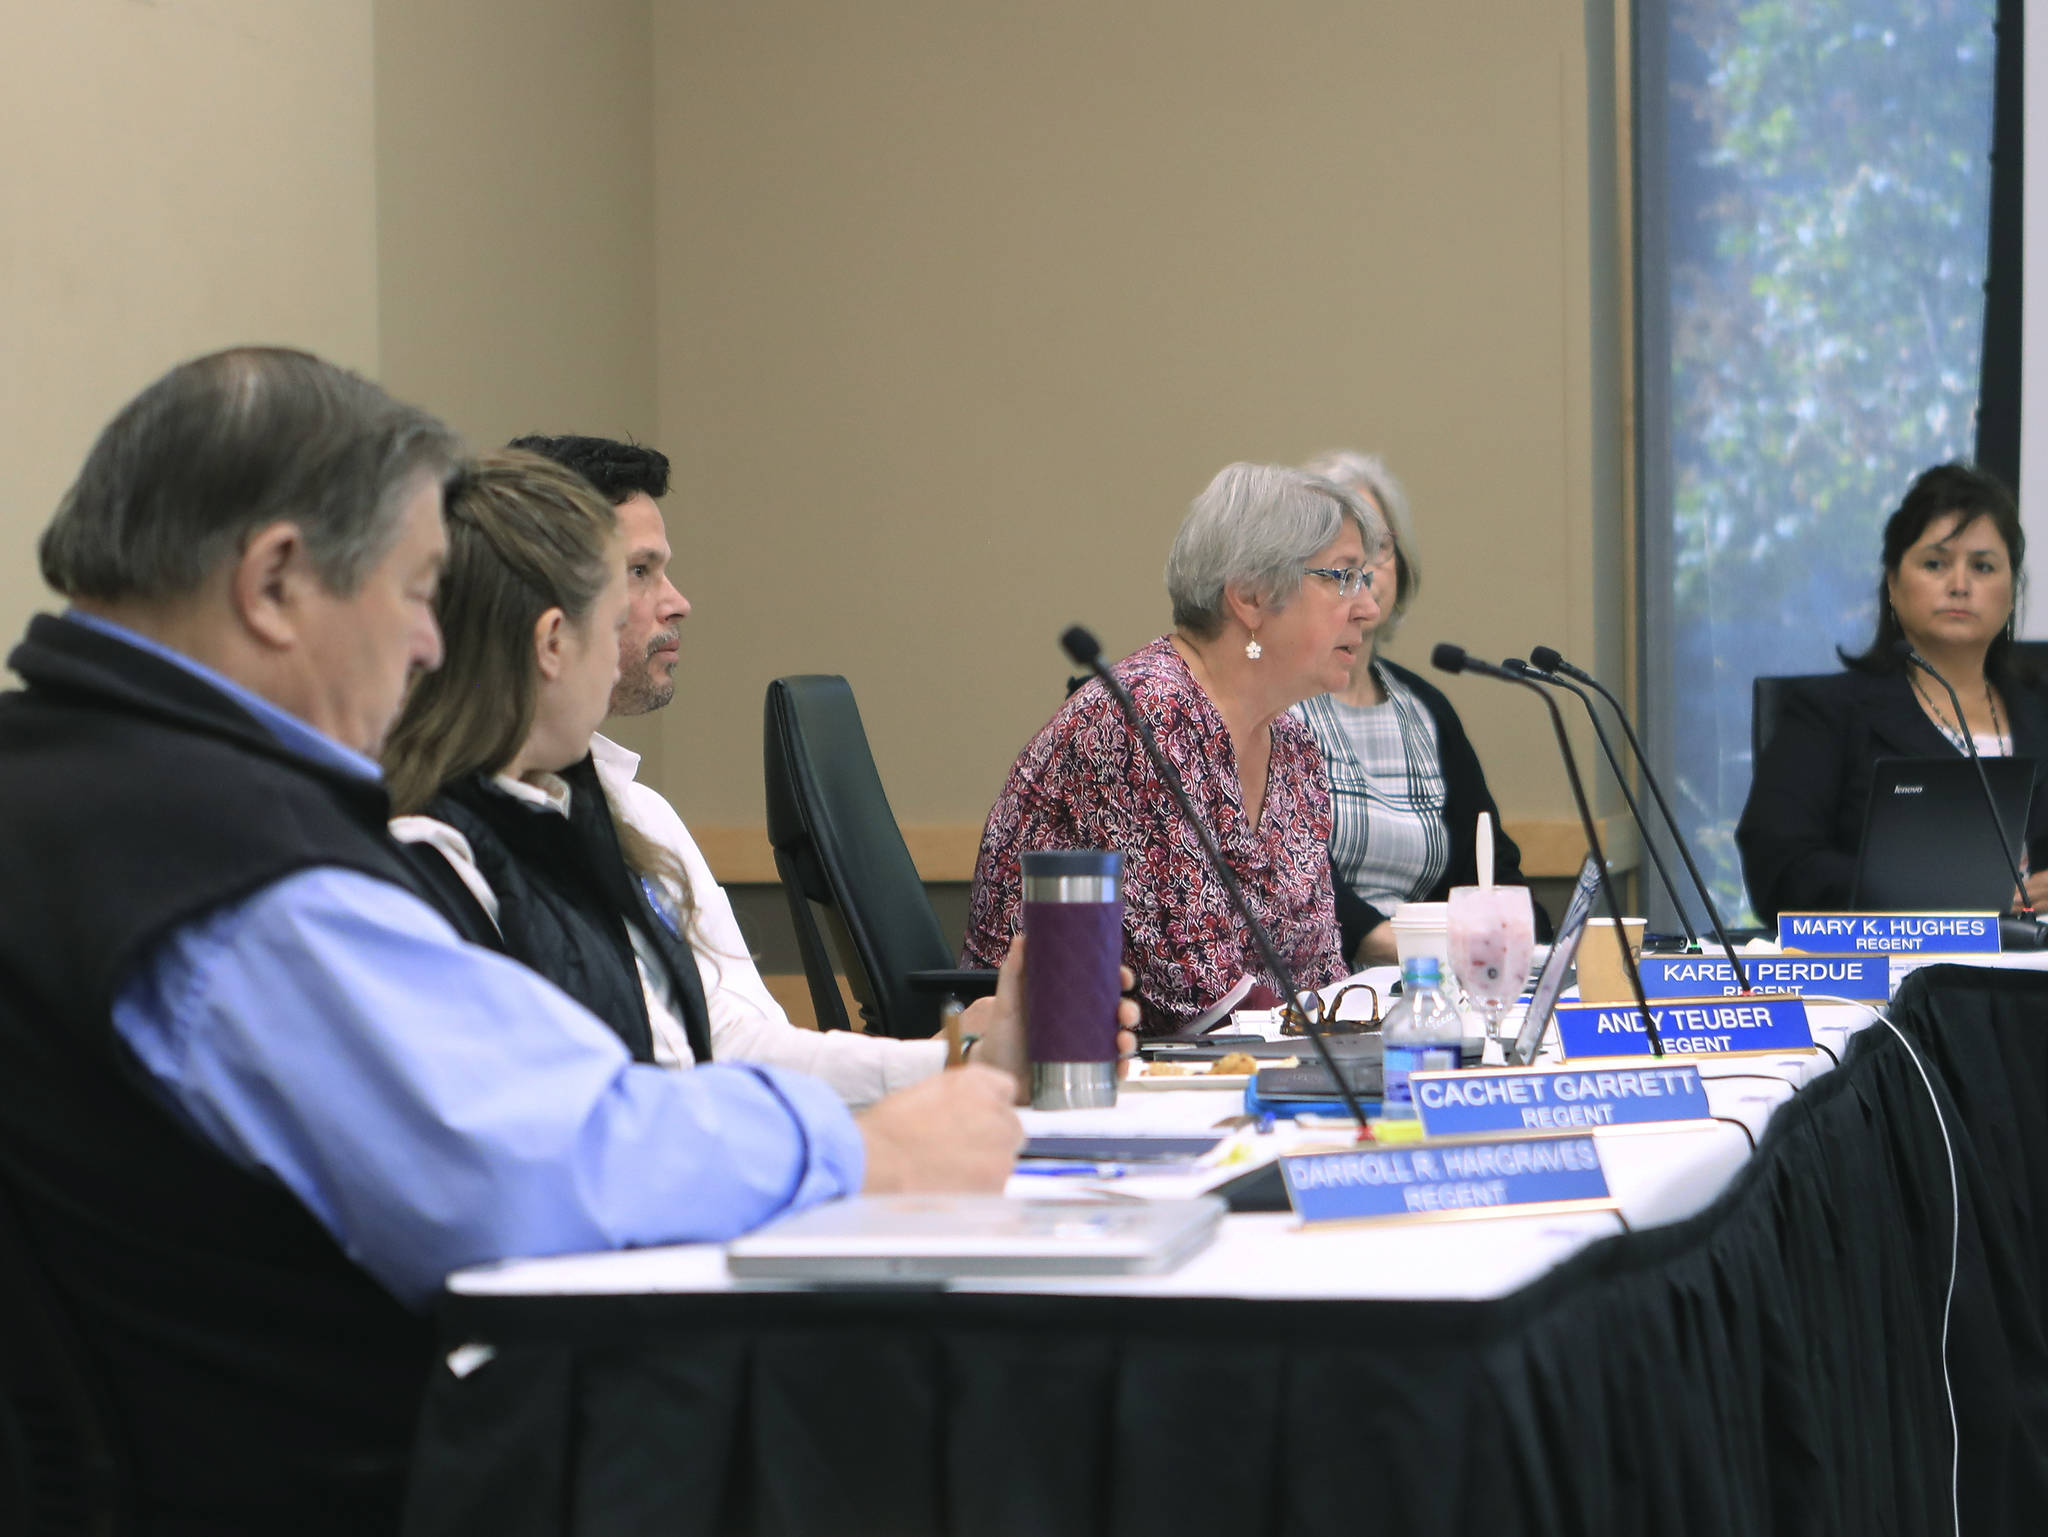 Dan Joling / Associated Press                                Regent Karen Perdue, center, speaks at an emergency meeting of the University of Alaska Board of Regents on July 22 in Anchorage. Regents voted 10-1 to declare a financial exigency, allowing administrators to expedite layoffs of tenured faculty in the face of severe budget issues.